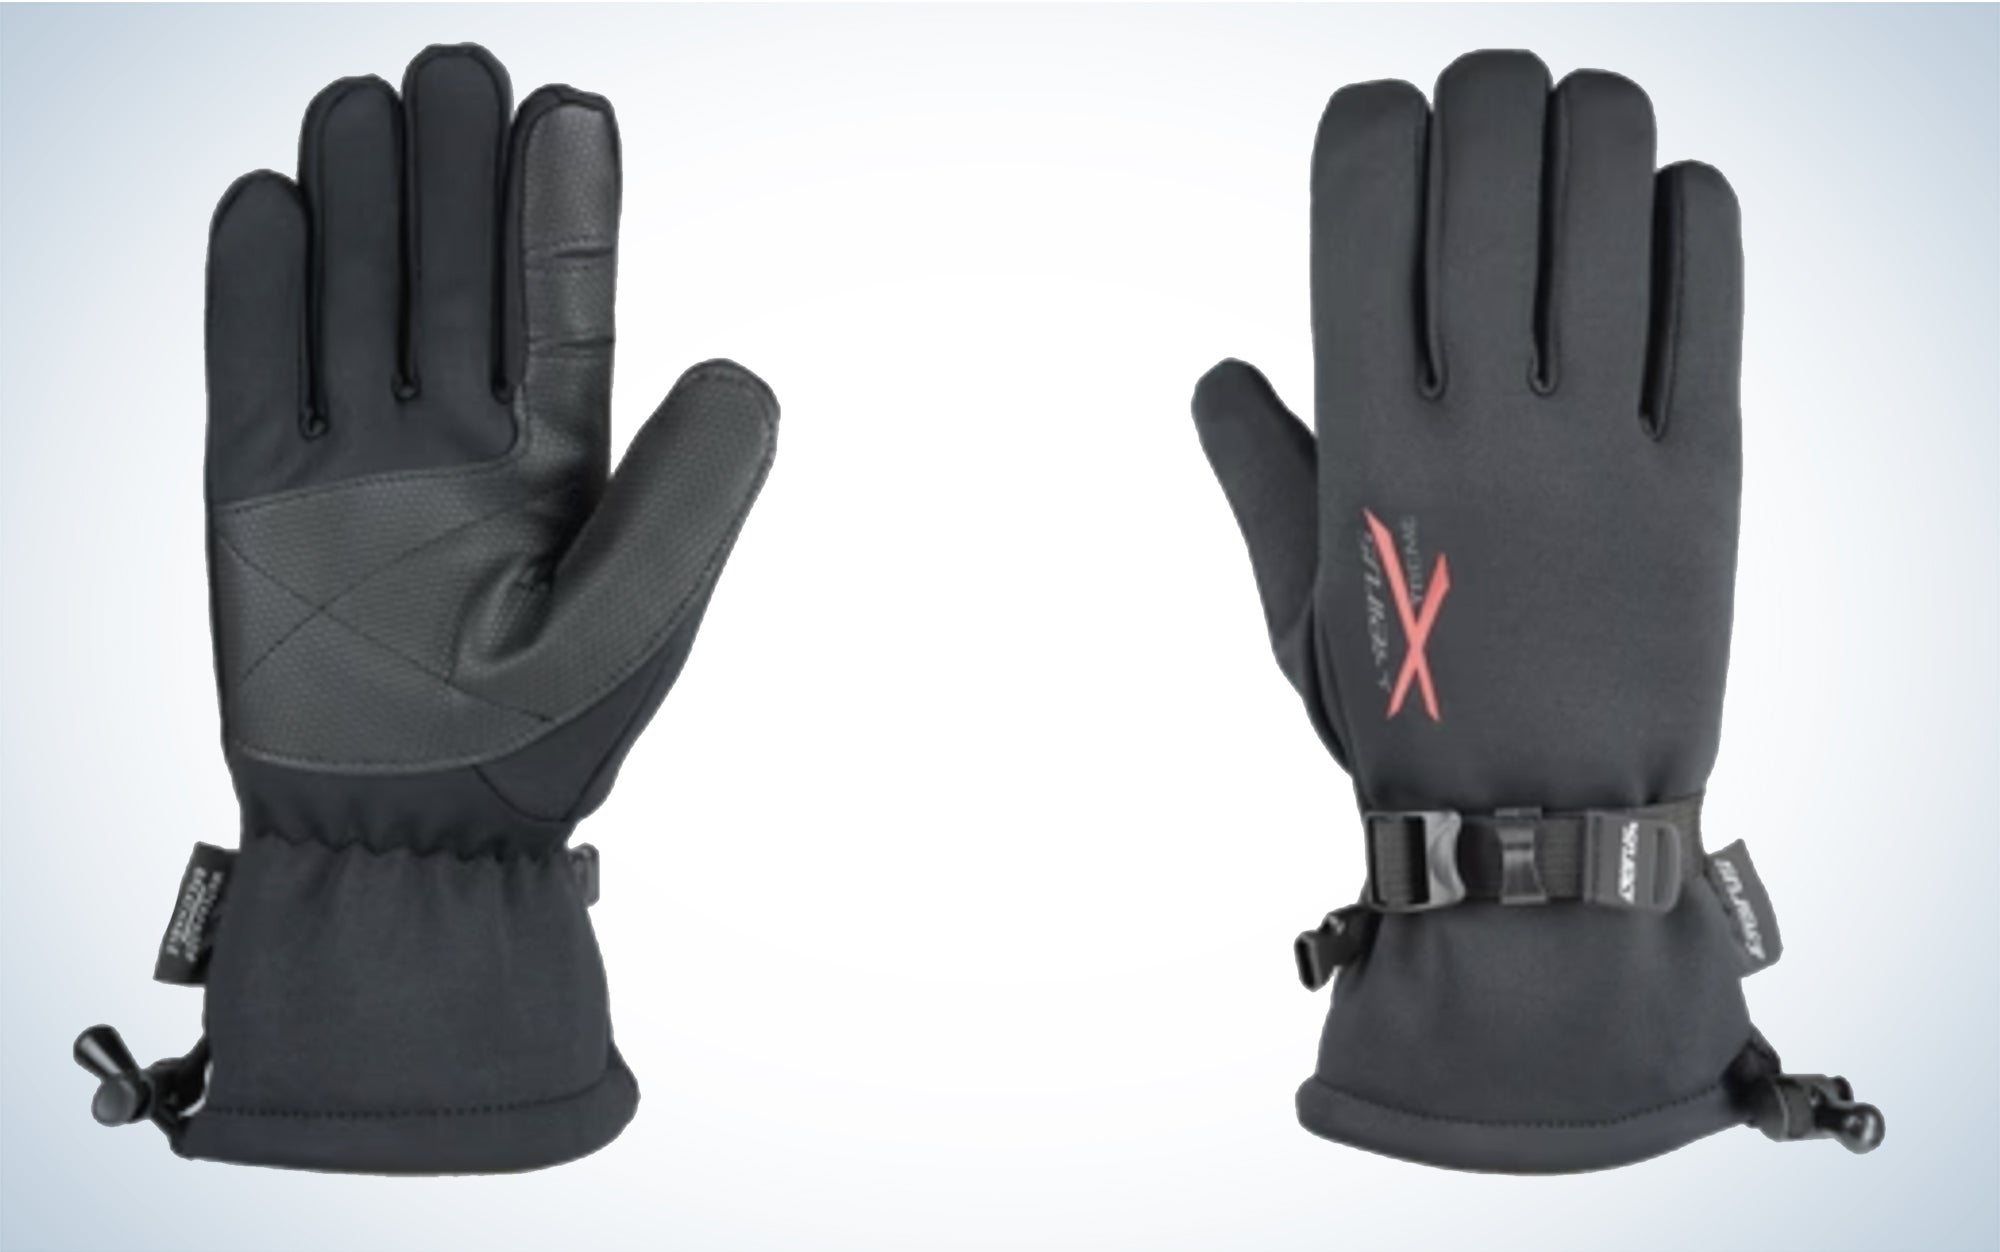 We tested the Seirus Xtreme All Weather Glove Gauntlet.